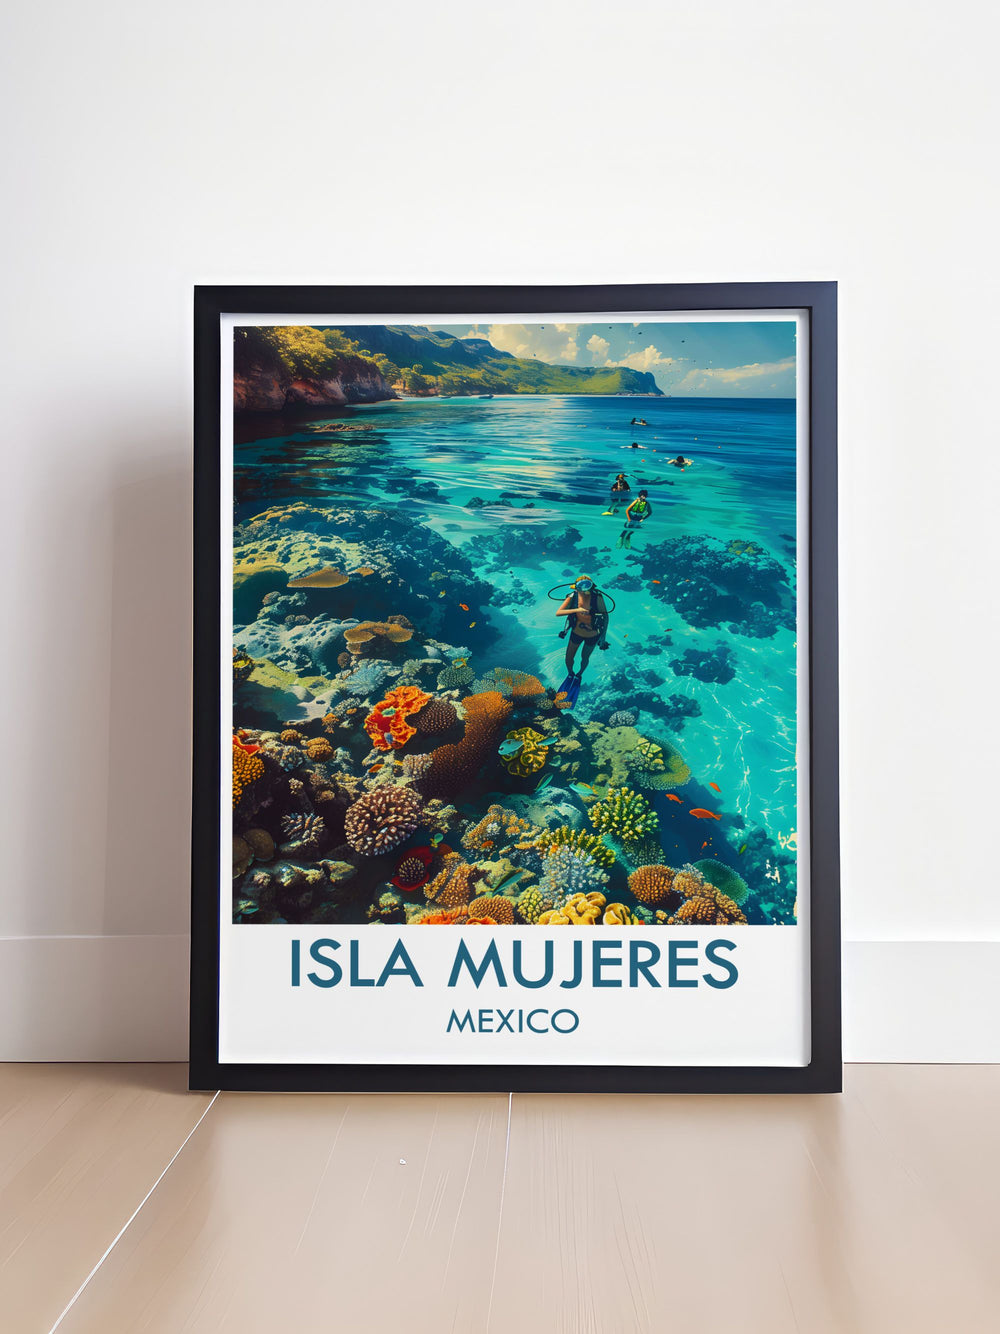 Custom print of Garrafon Natural Reef Park, capturing the parks thrilling zip lines and scenic hiking trails, ideal for those who love outdoor adventures and breathtaking views.